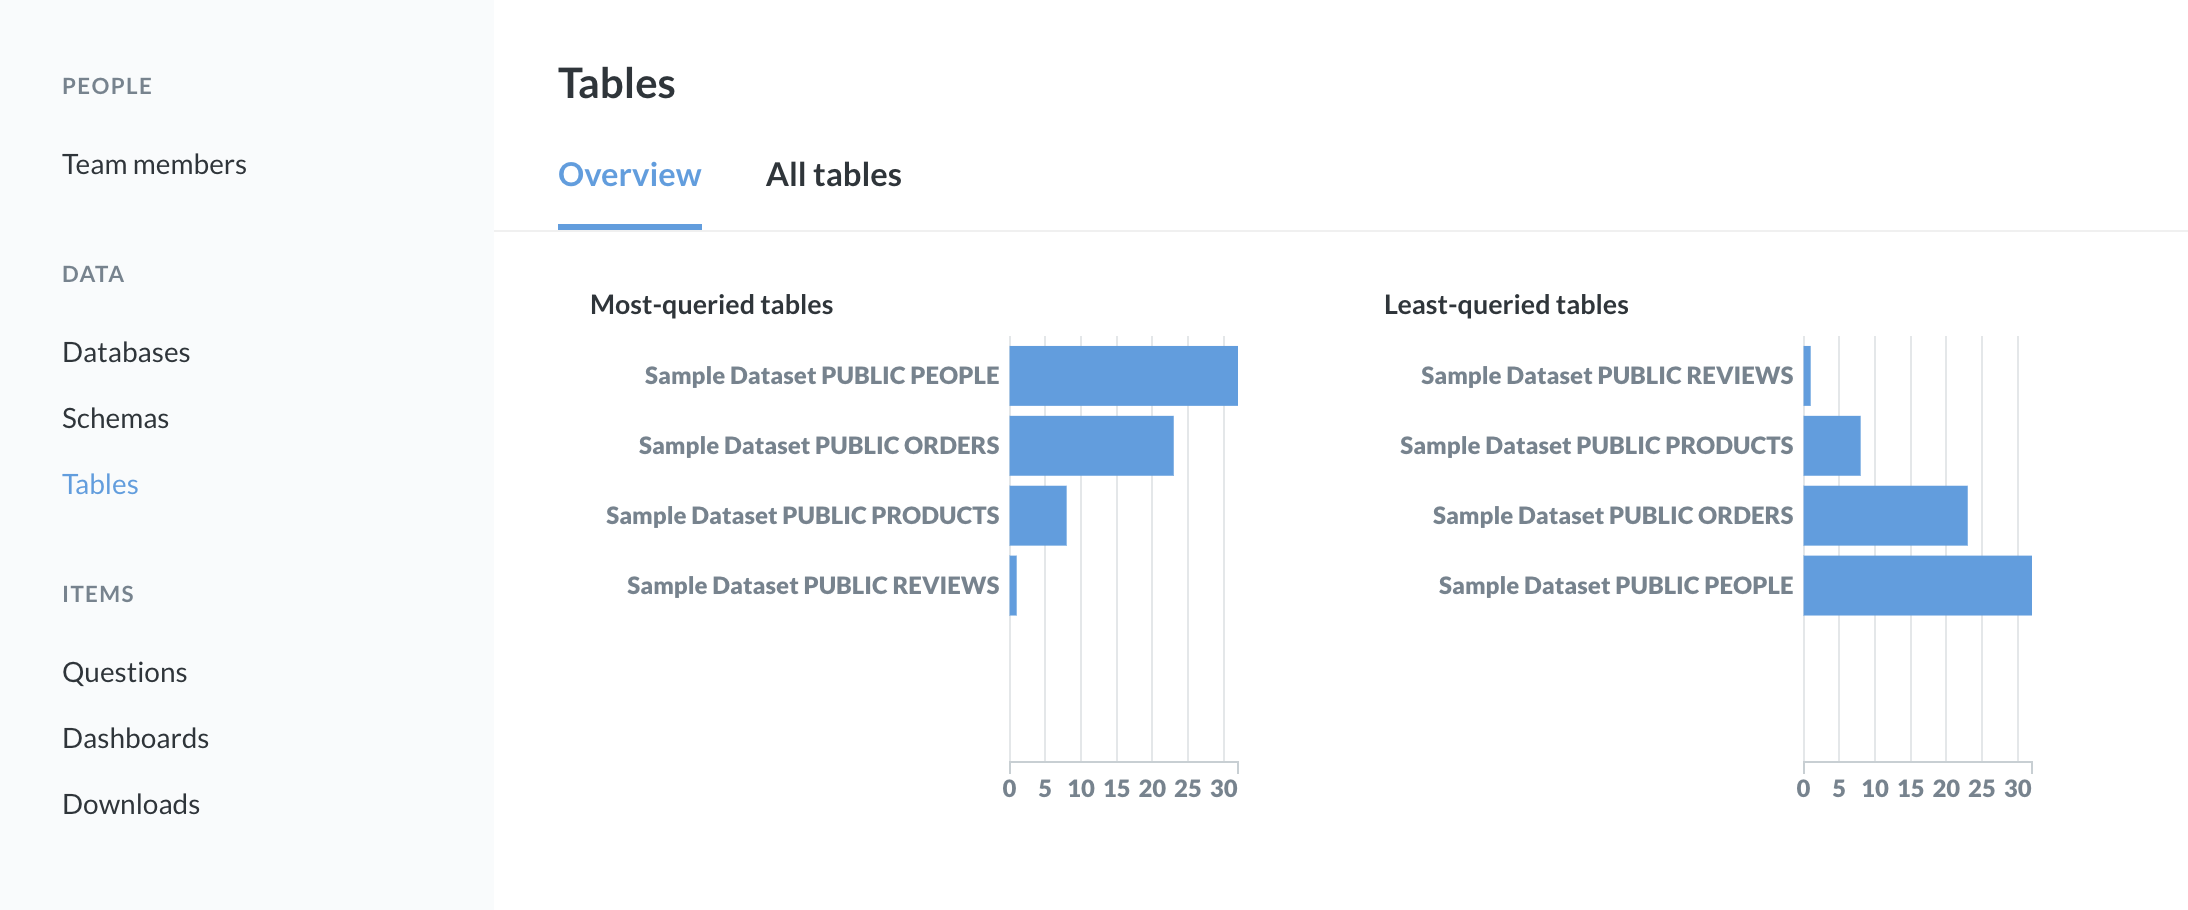 The tables overview page with the mouse hovering over the PUBLIC PEOPLE item in the bar chart.